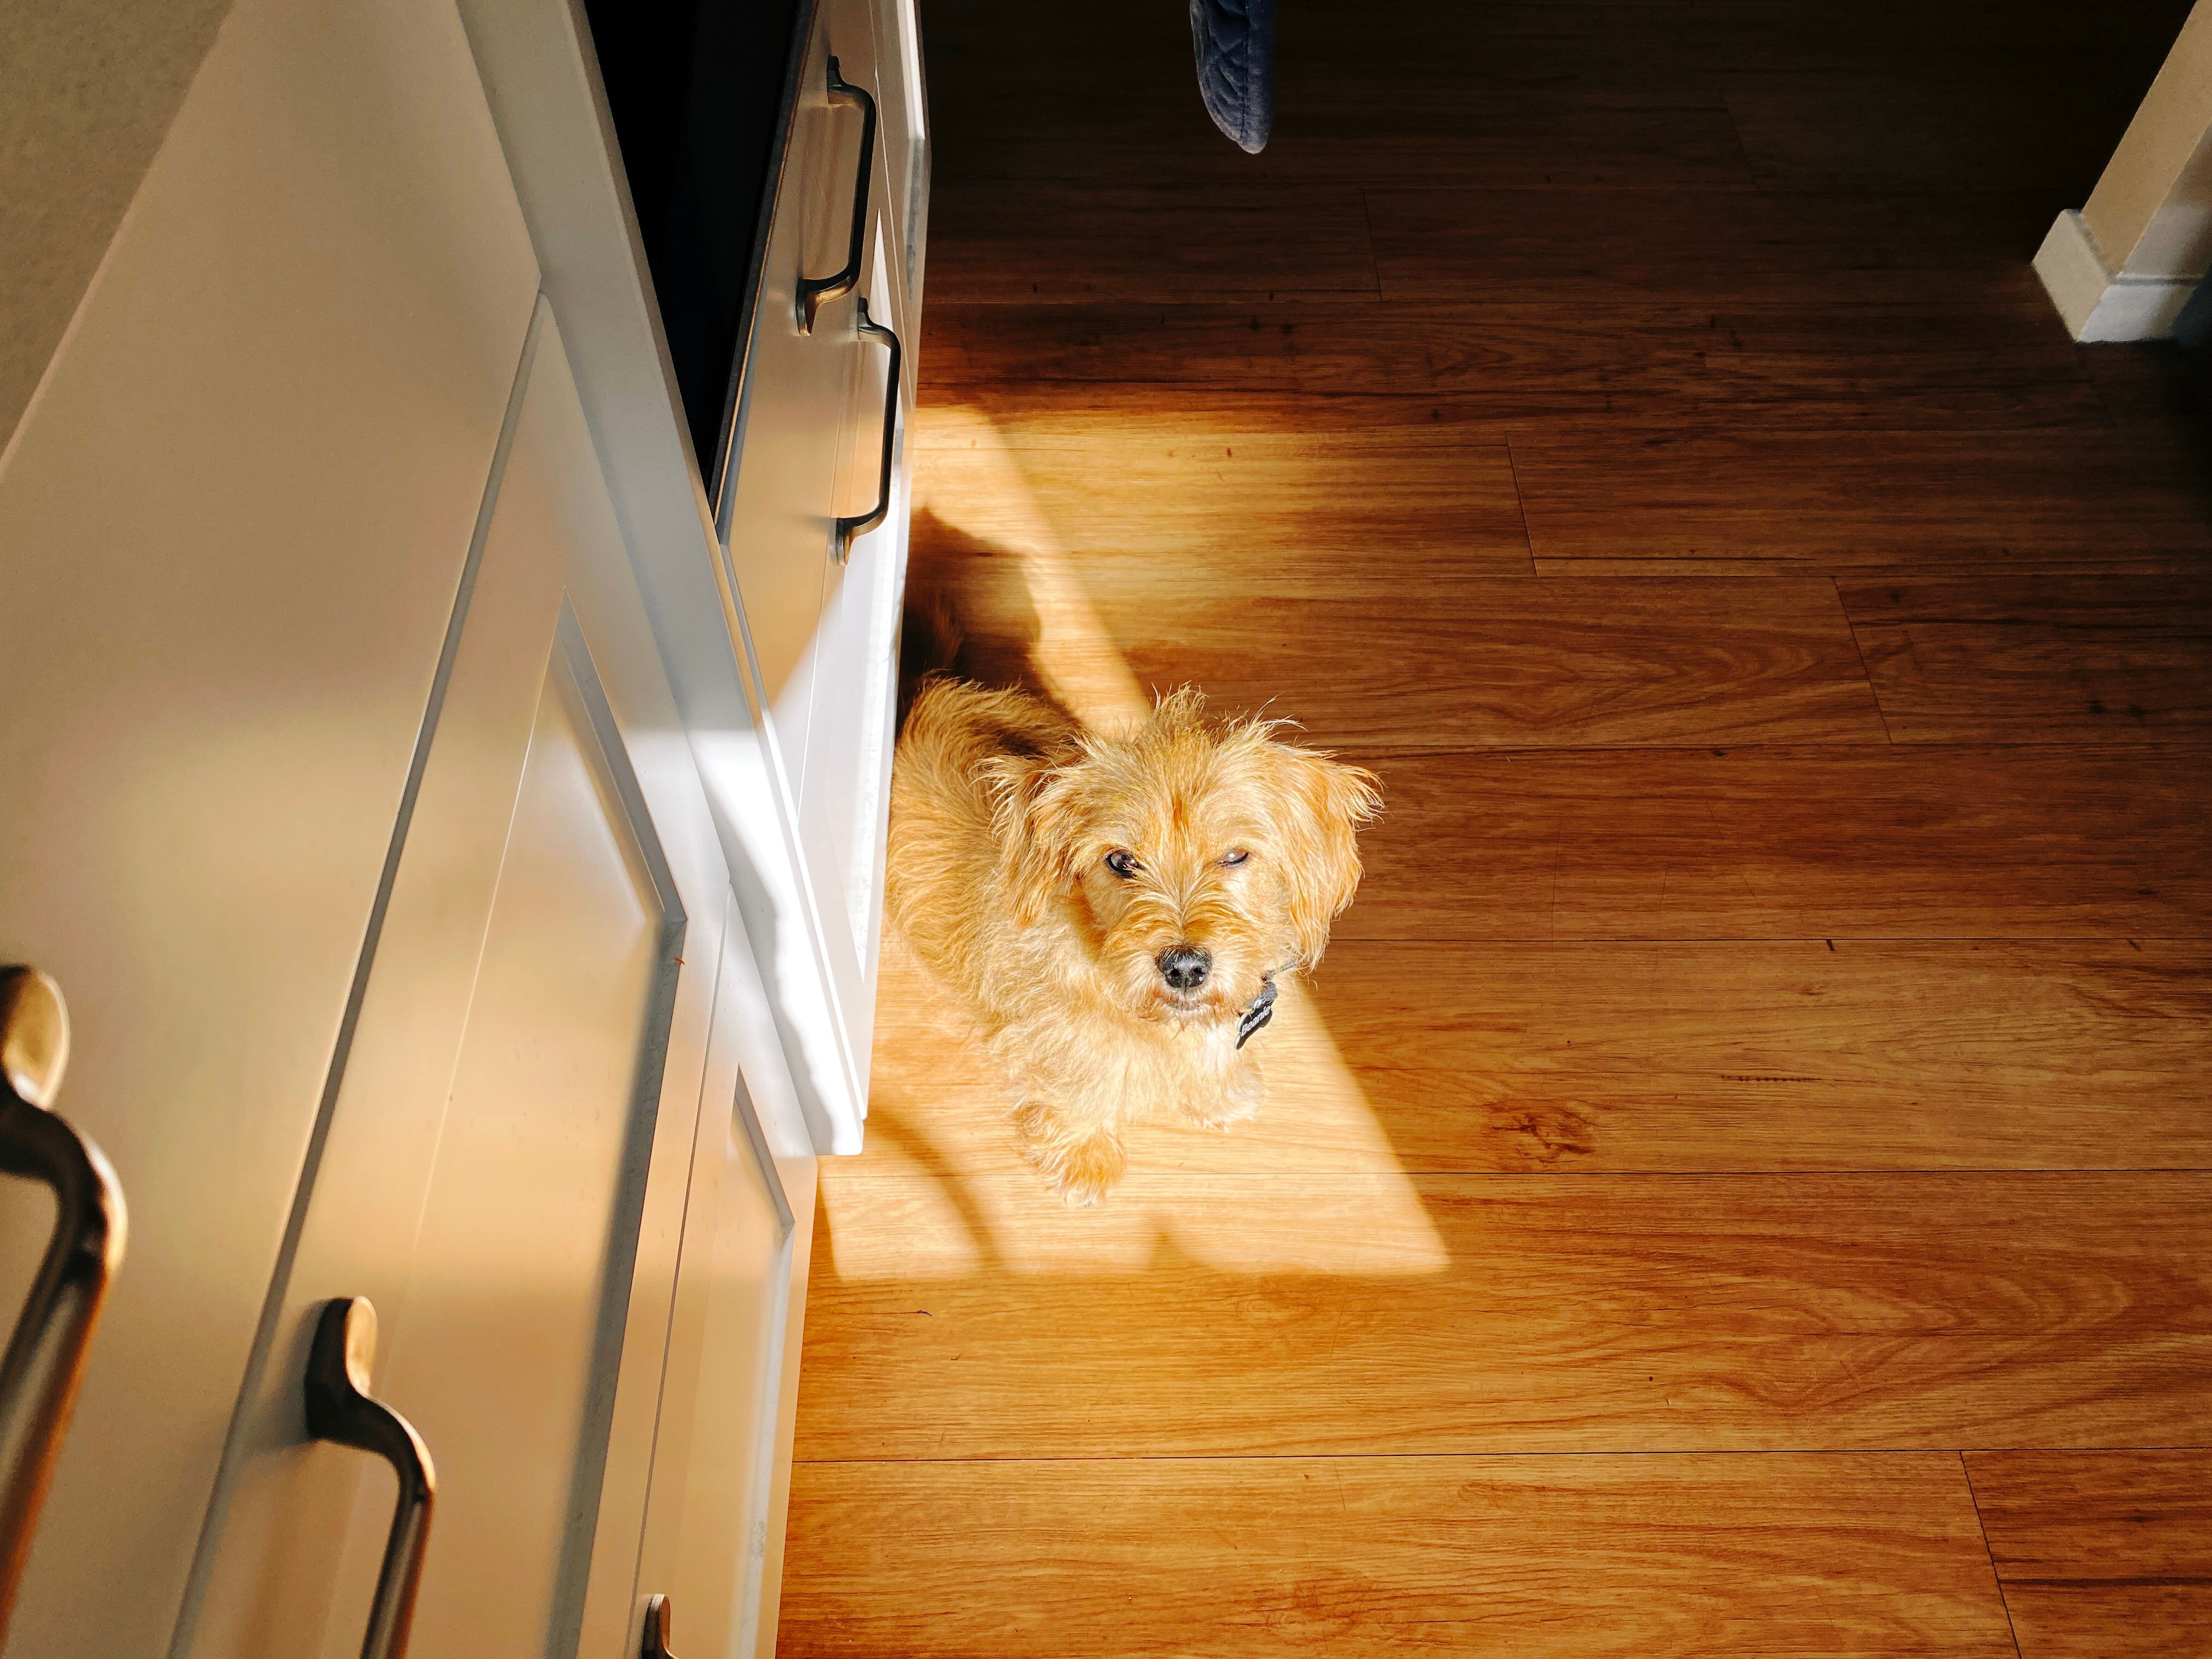 A photo of a small scruffy blonde dog sitting on the kitchen floor in a patch of sunshine. He's looking up at the camera and is squinting because the sun is coming in directly behind where I'm standing.